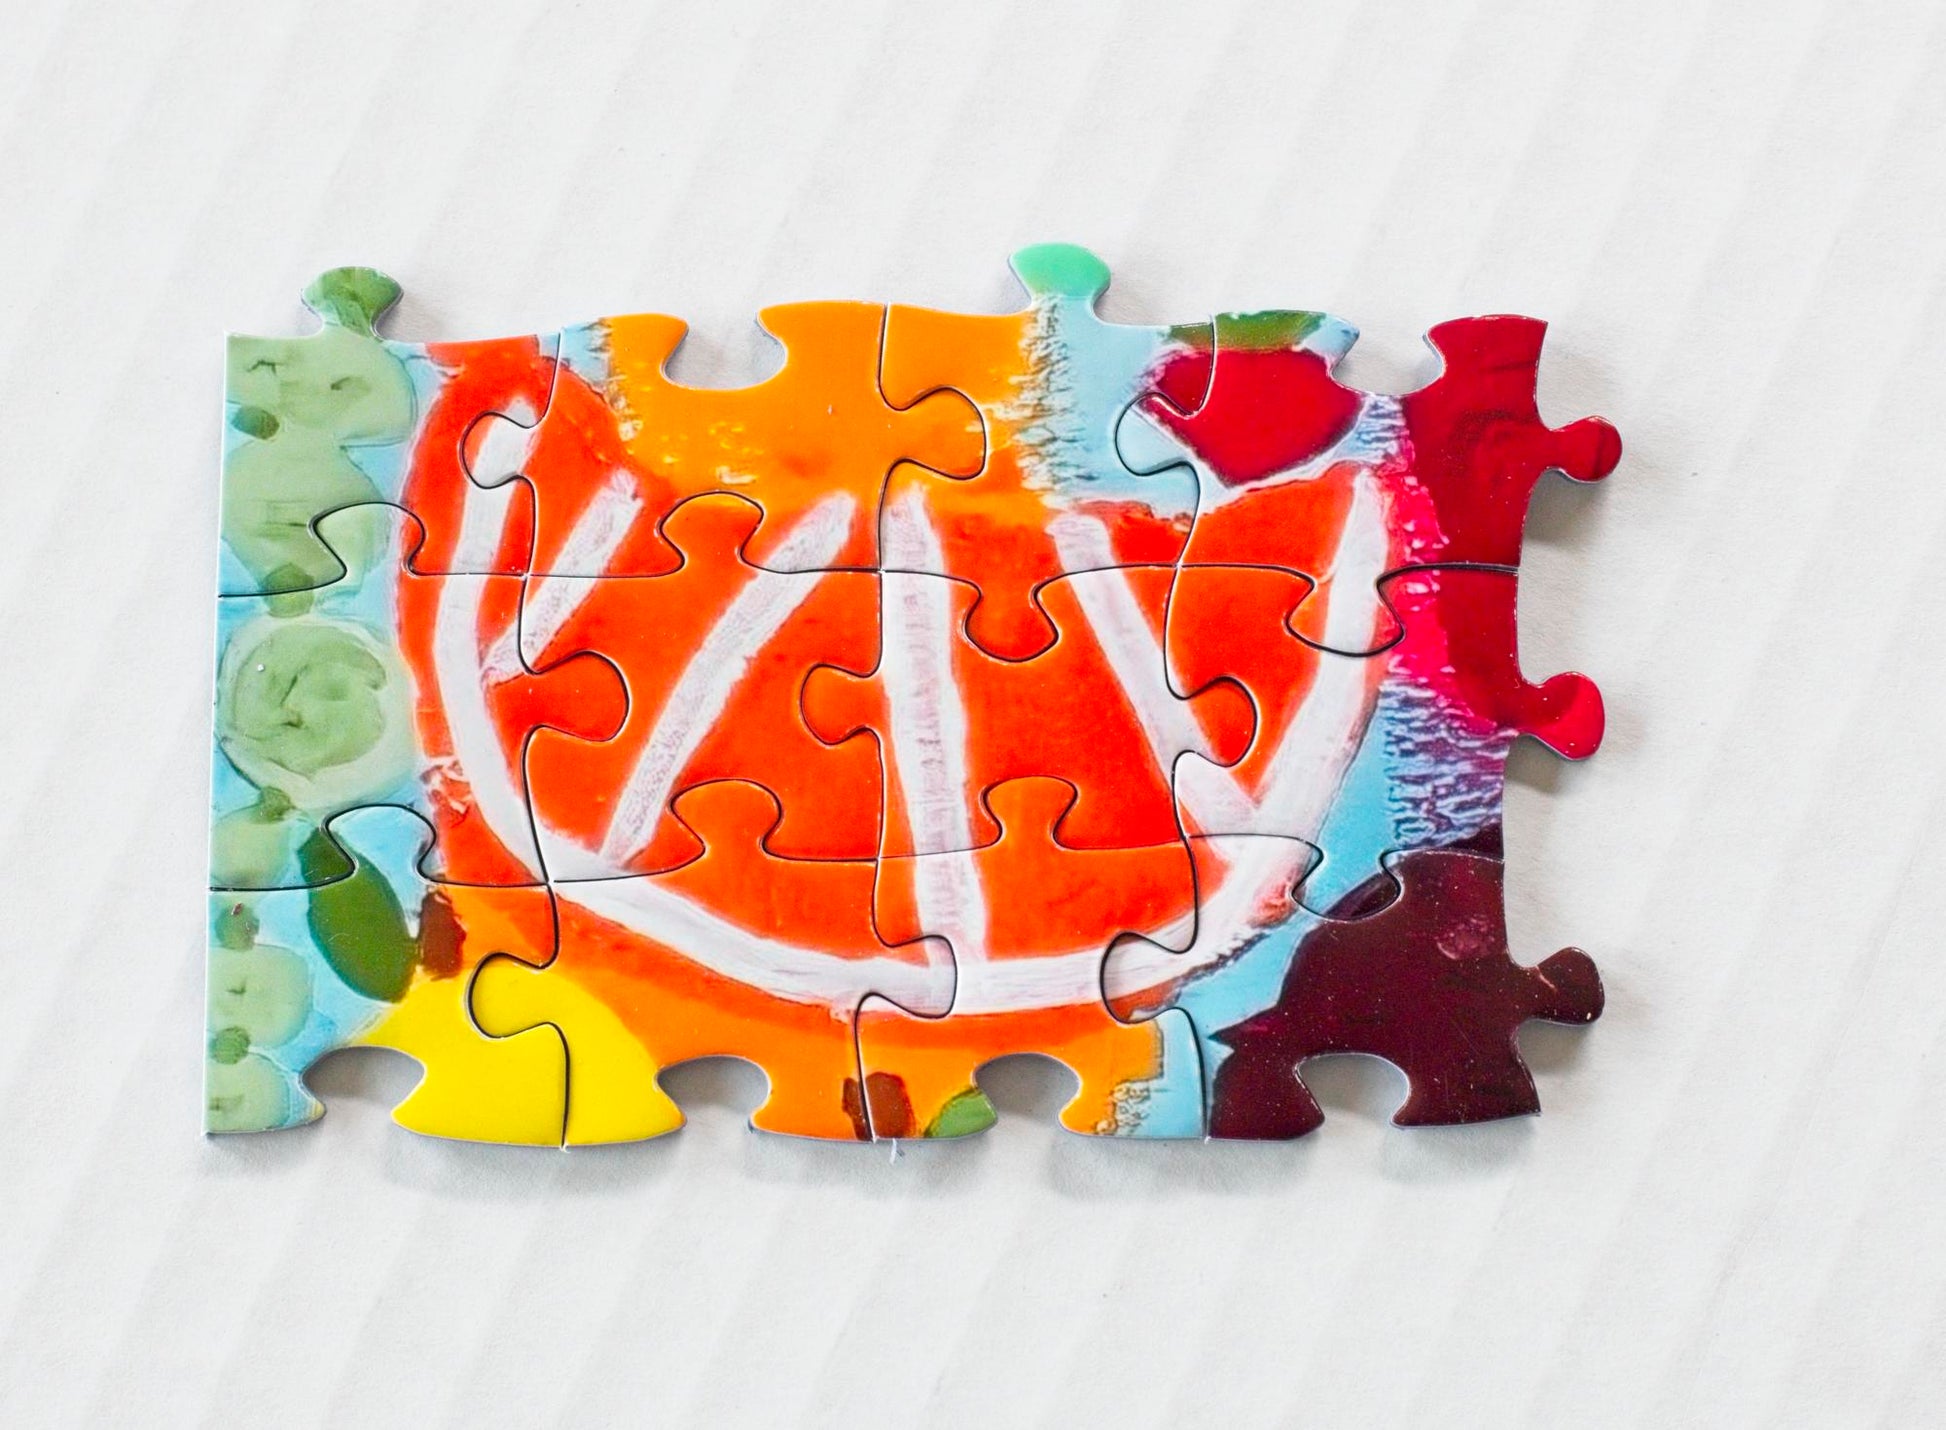 An orange wedge depicted on 12 interlinked jigsaw puzzle pieces